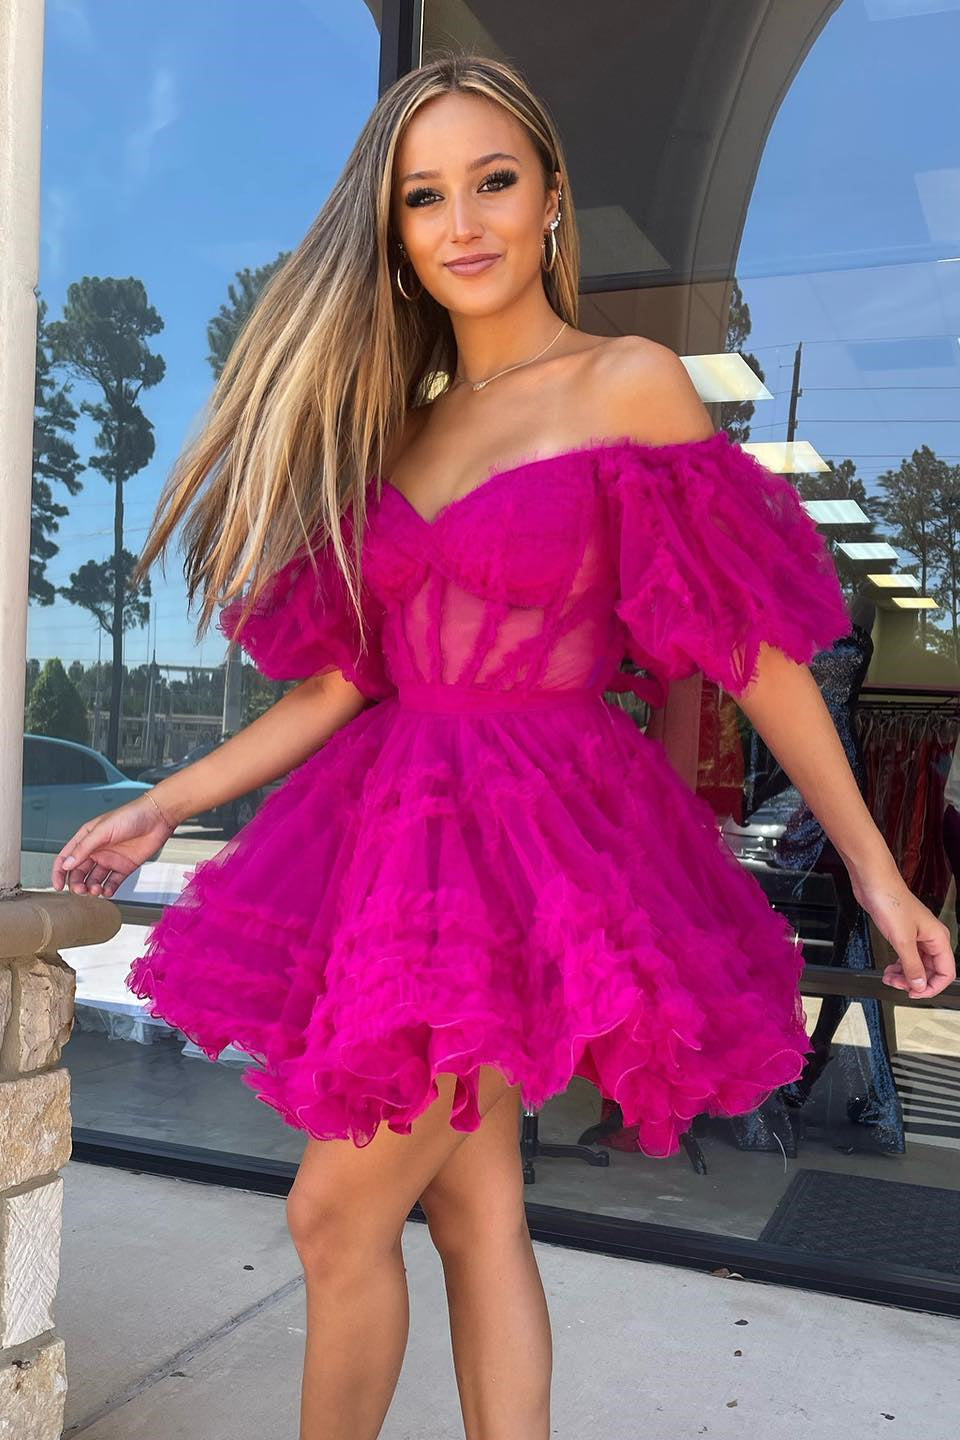 Pink Off-the-Shoulder Ruffles Puff Sleeves Homecoming Dress